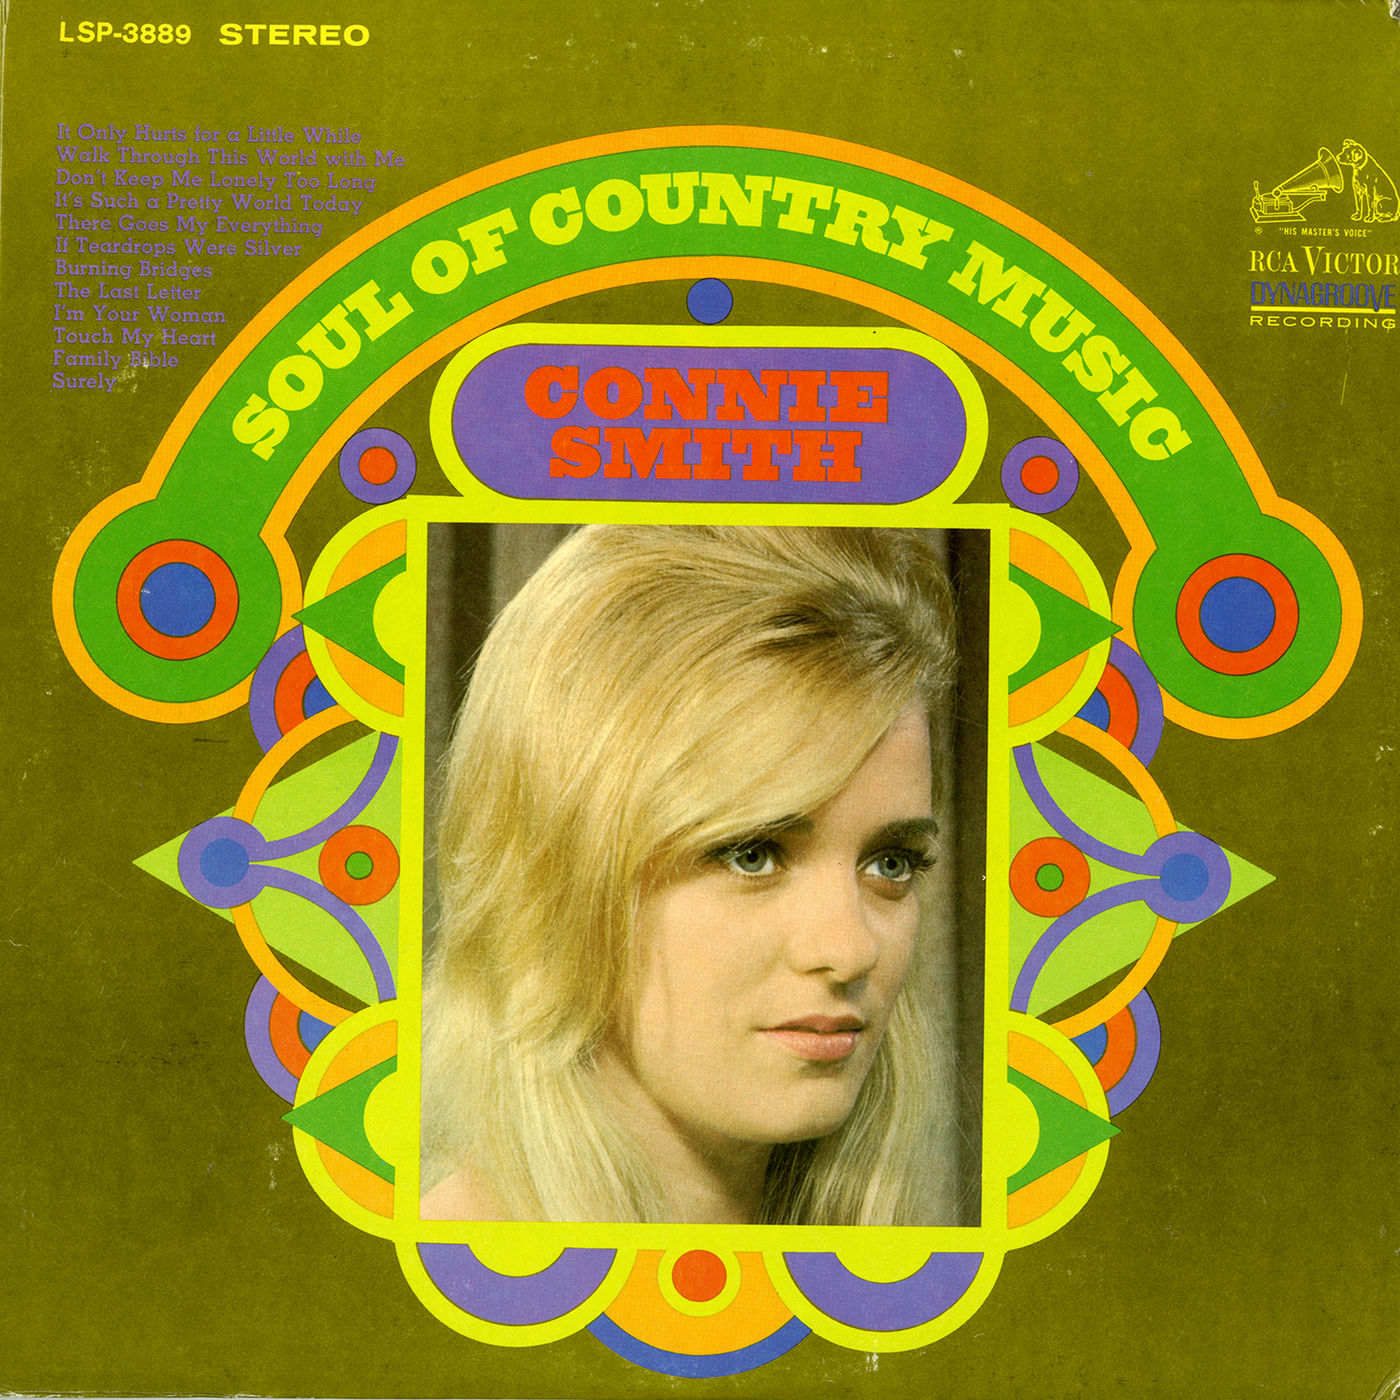 Connie Smith – Soul of Country Music (1967/2017) [FLAC 24bit/96kHz]